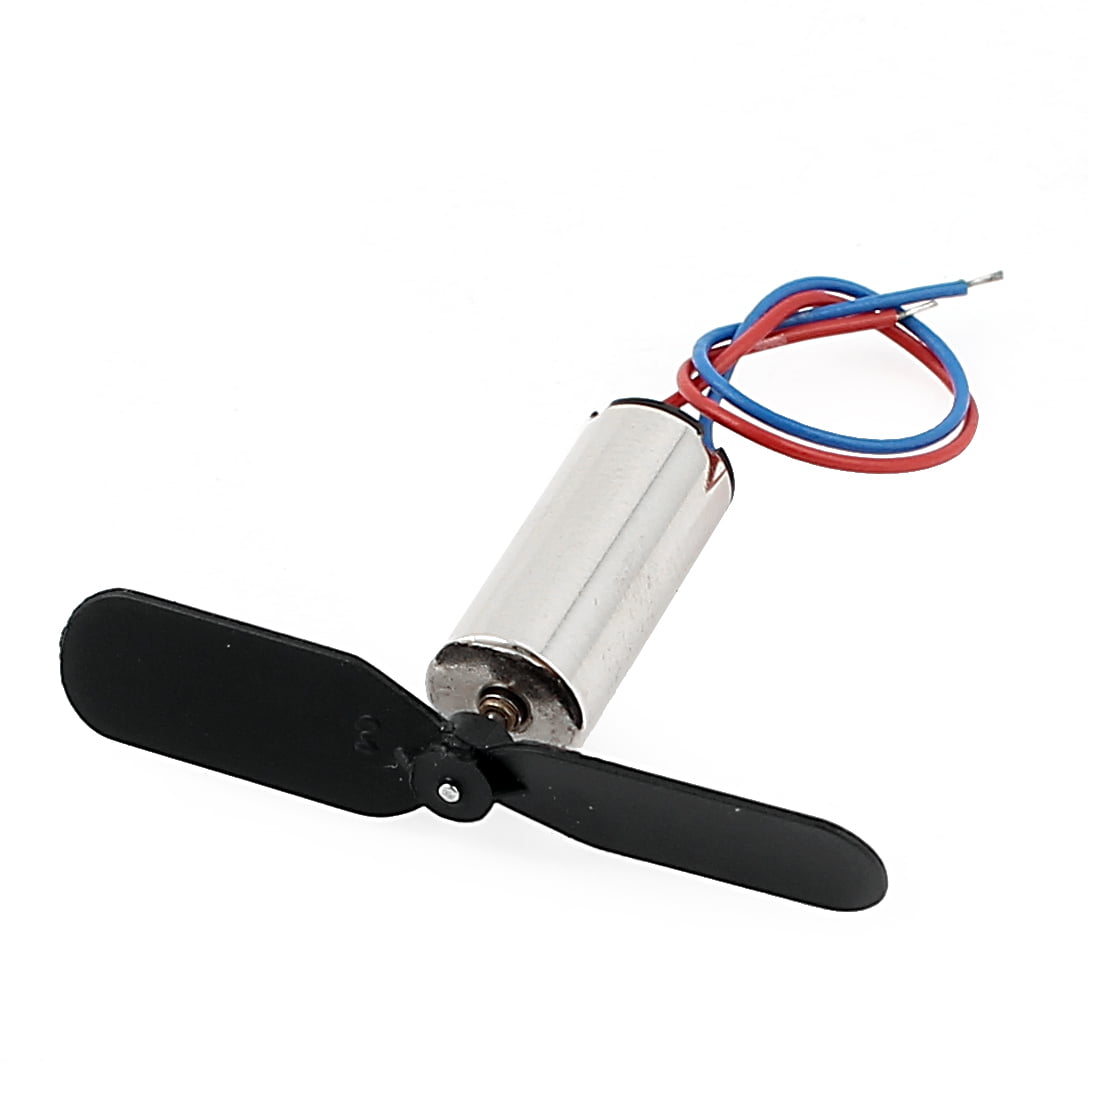 2 PCS DC 3.7V 48000RPM Coreless Motor Propeller For RC Aircraft-Helicopter-Dr